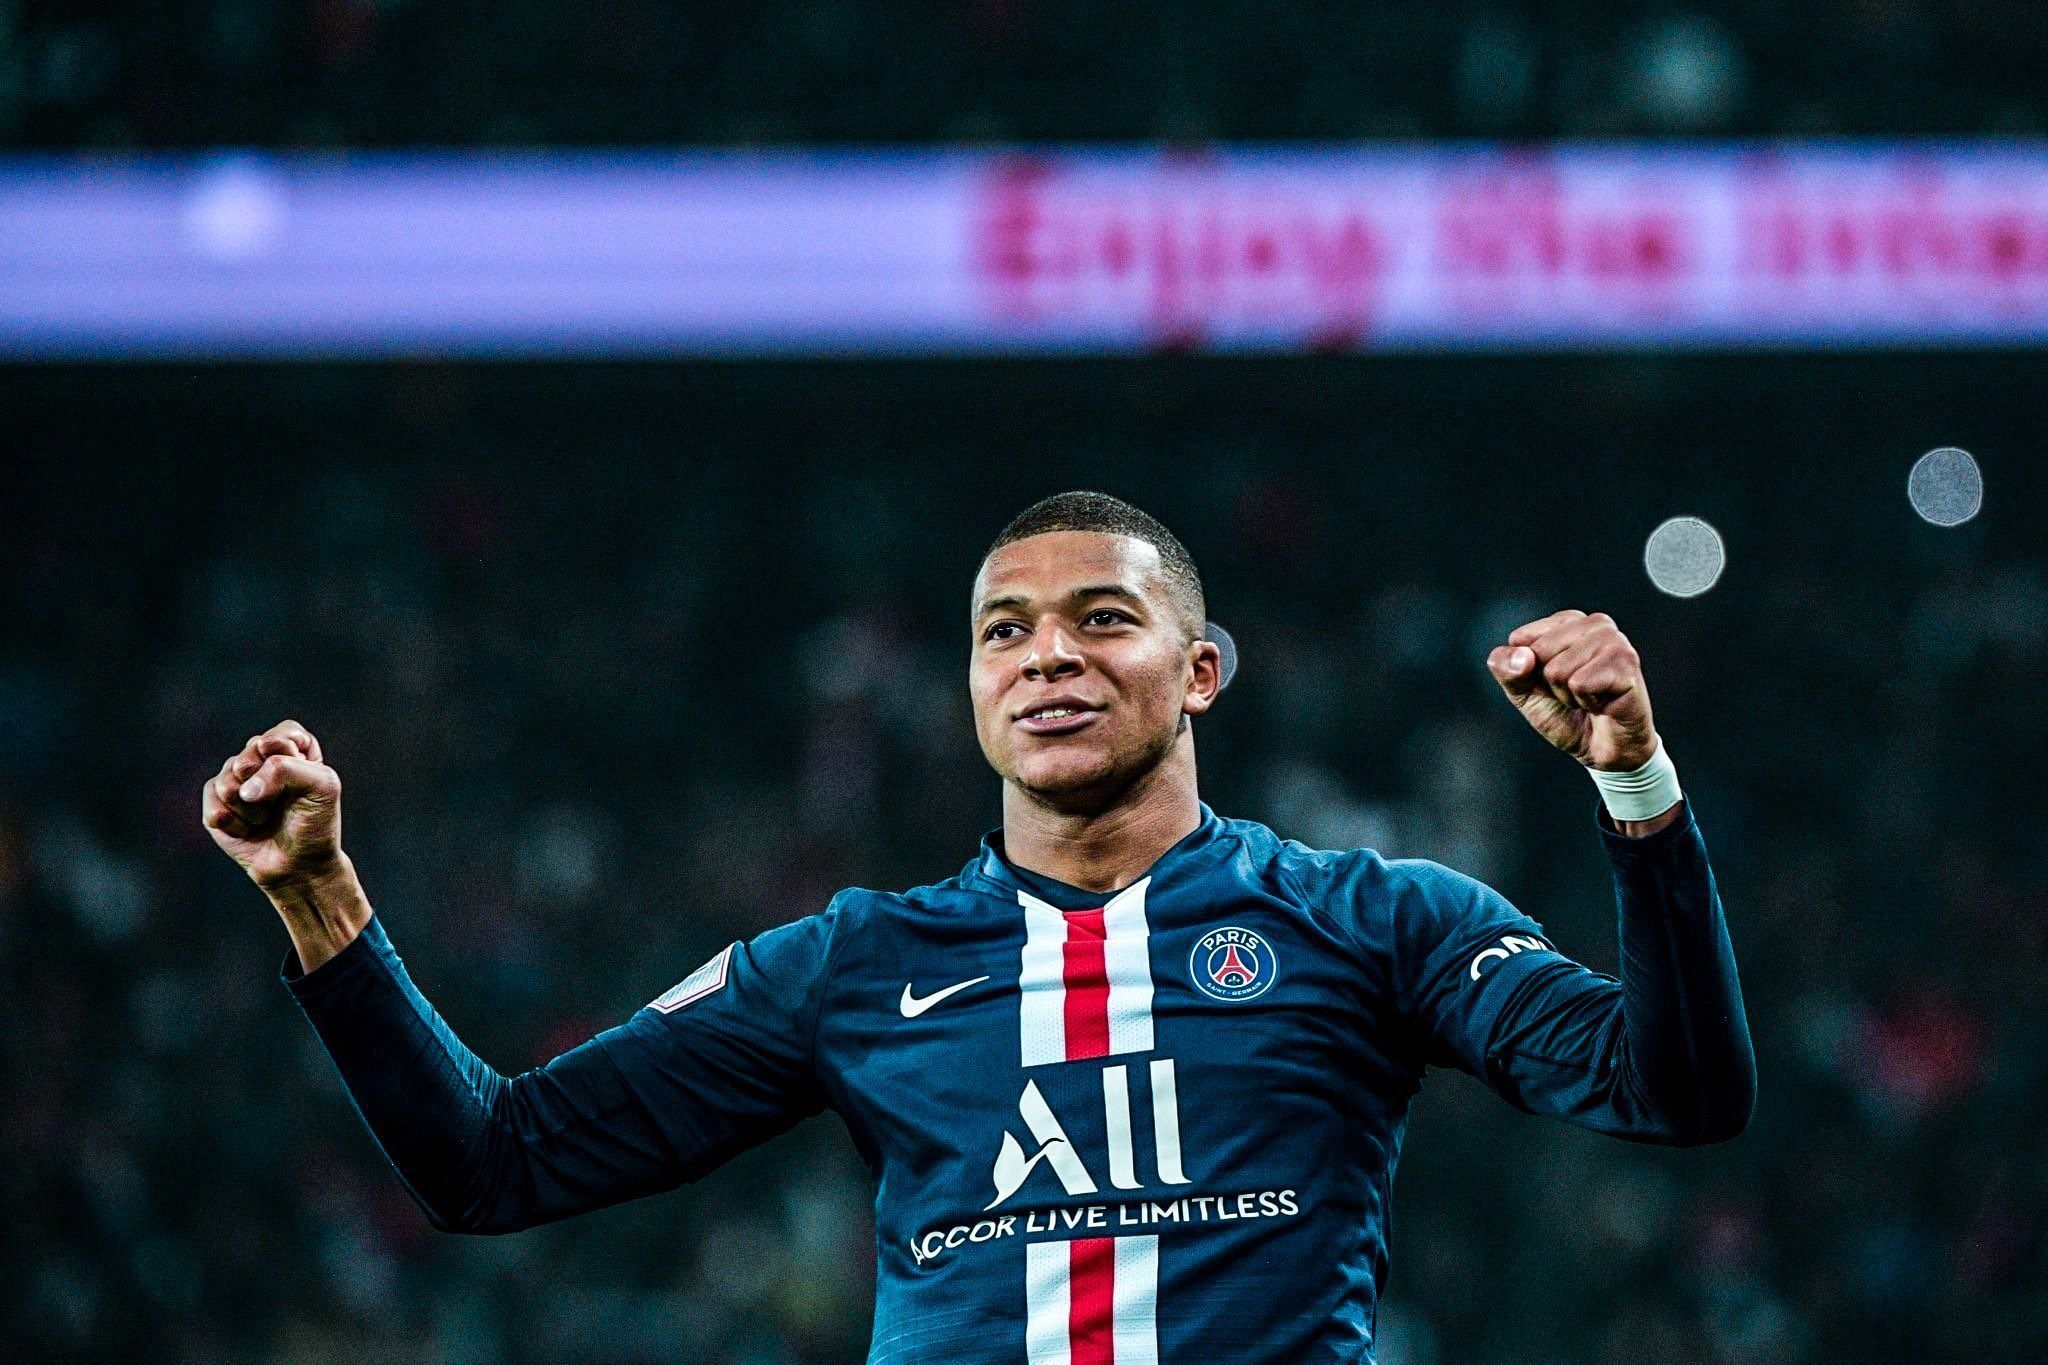 Mbappe to join Real Madrid from PSG in summer transfer window: Report